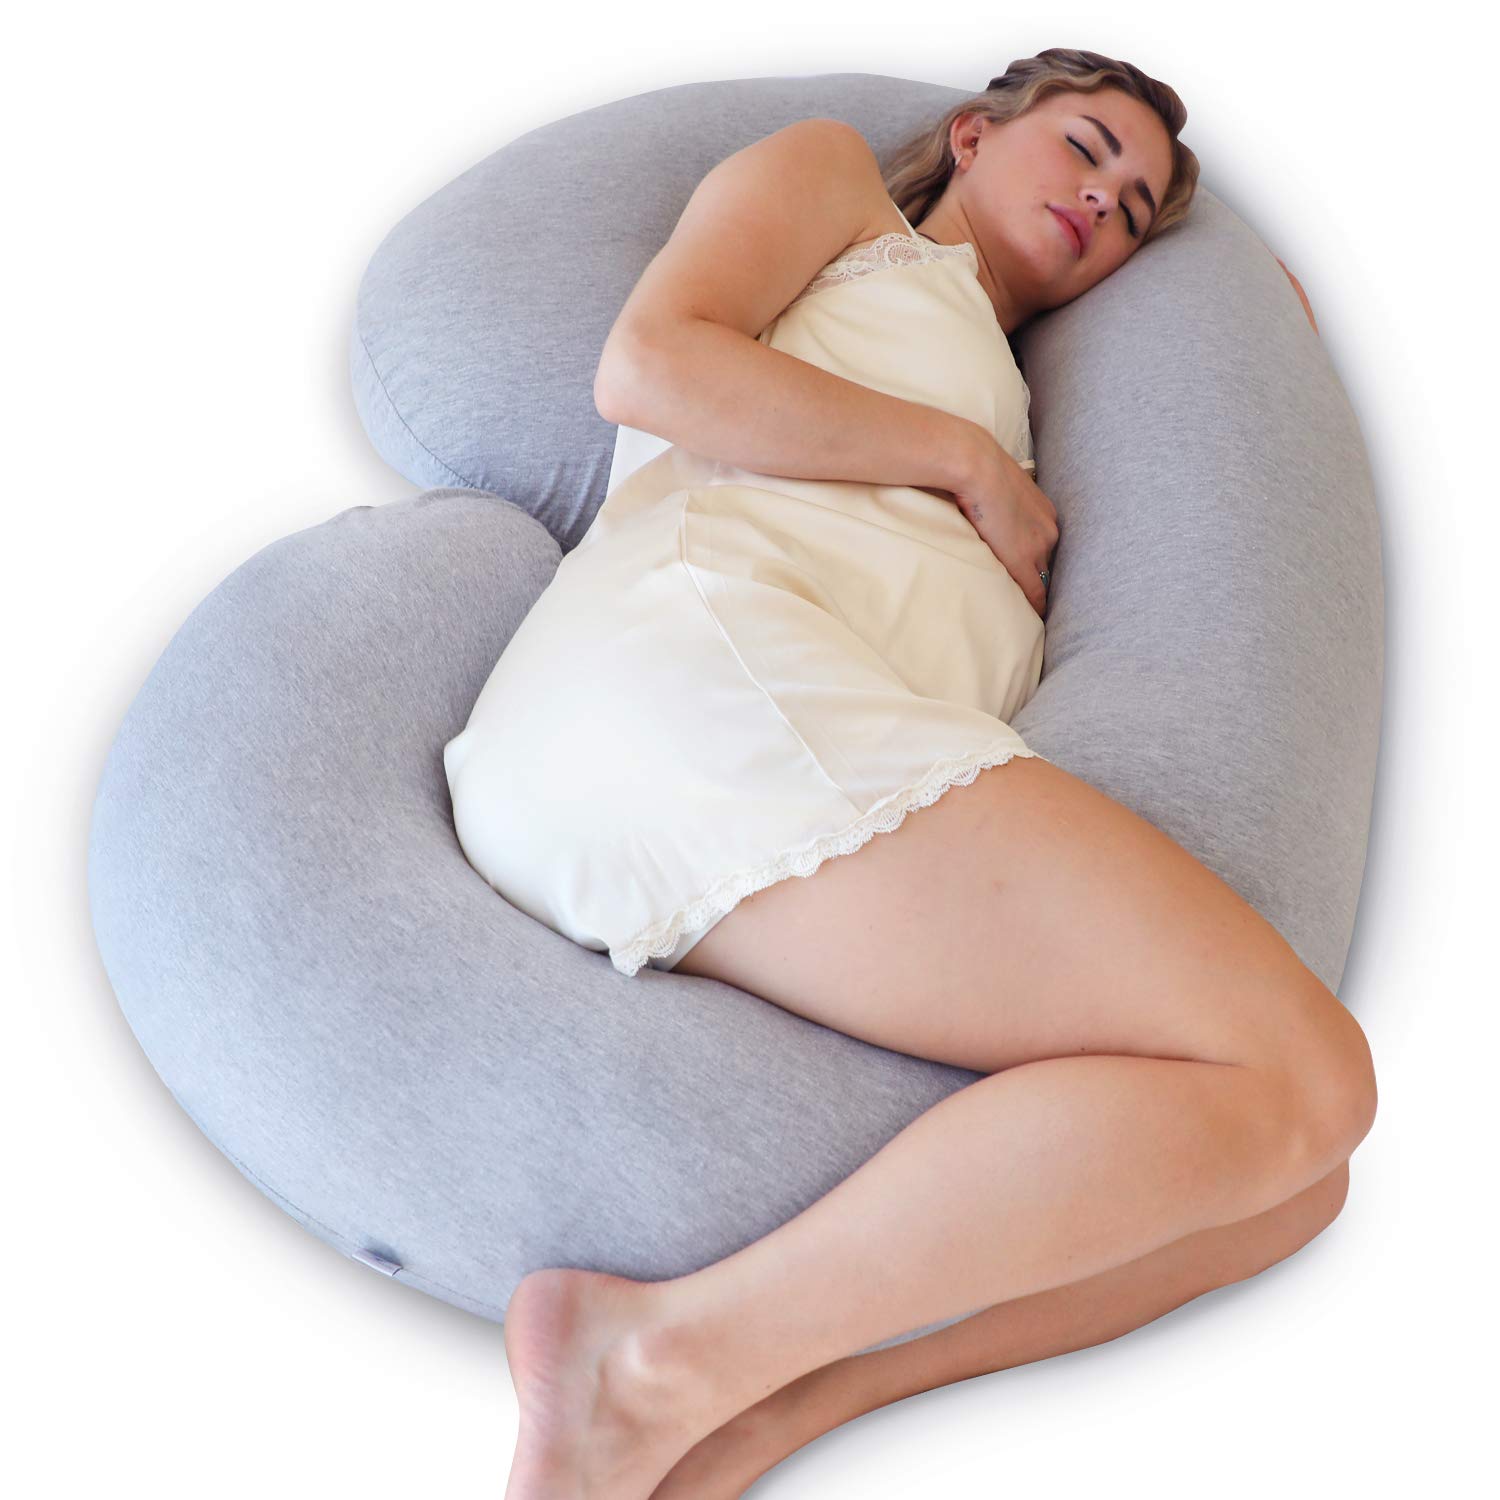 Pregnancy Pillows for Sleeping, Maternity, Pregnancy Body Pillow Support for Back, Legs, Belly, Hips of Pregnant Women, Detachable and Adjustable with